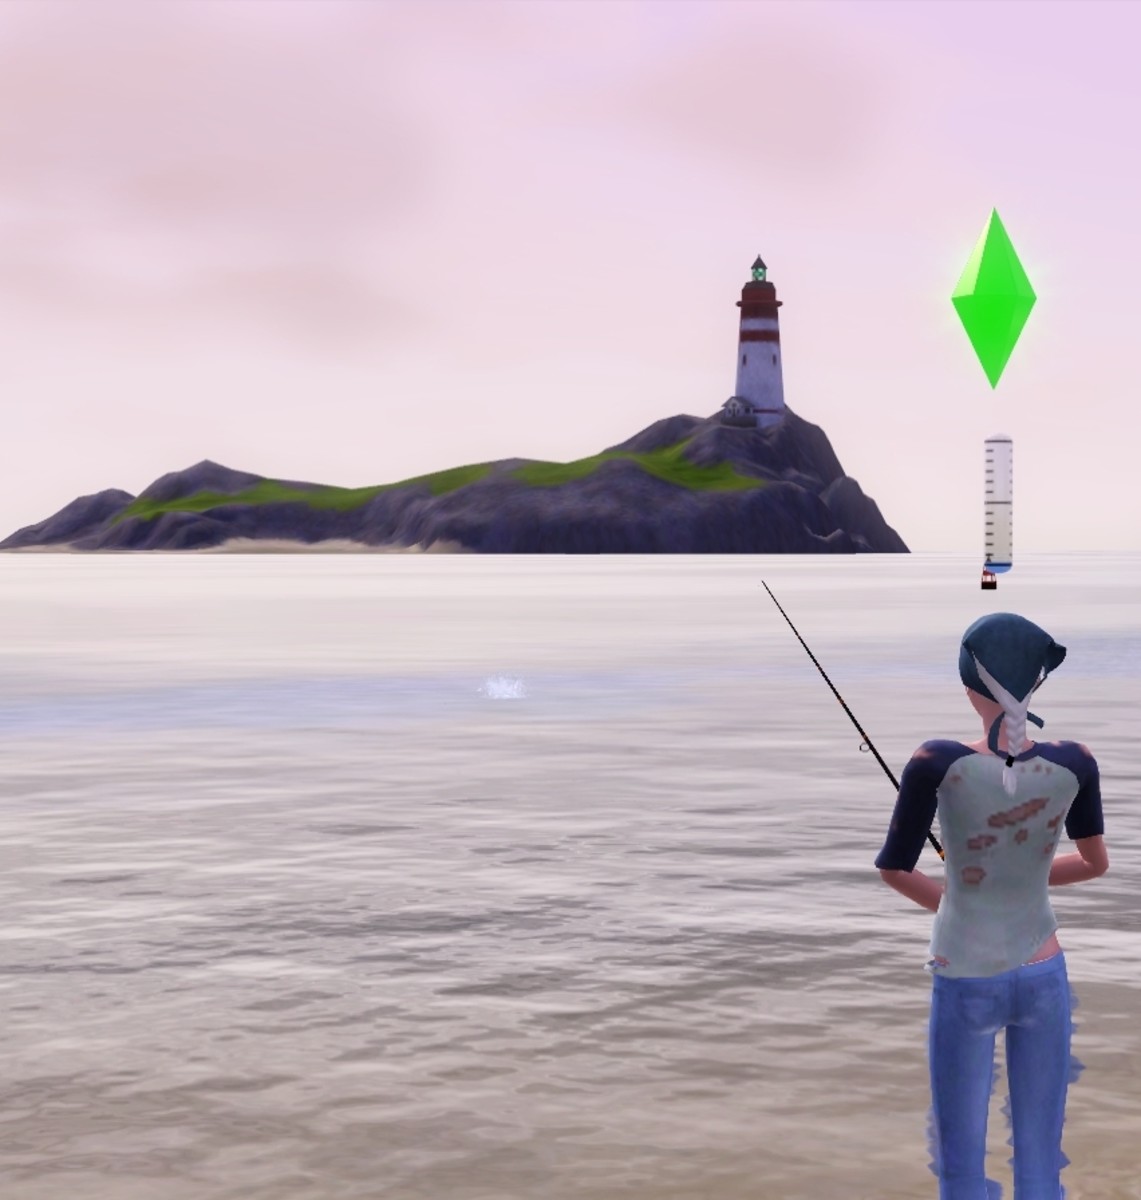 Have your homeless Sim fish to earn food and money.